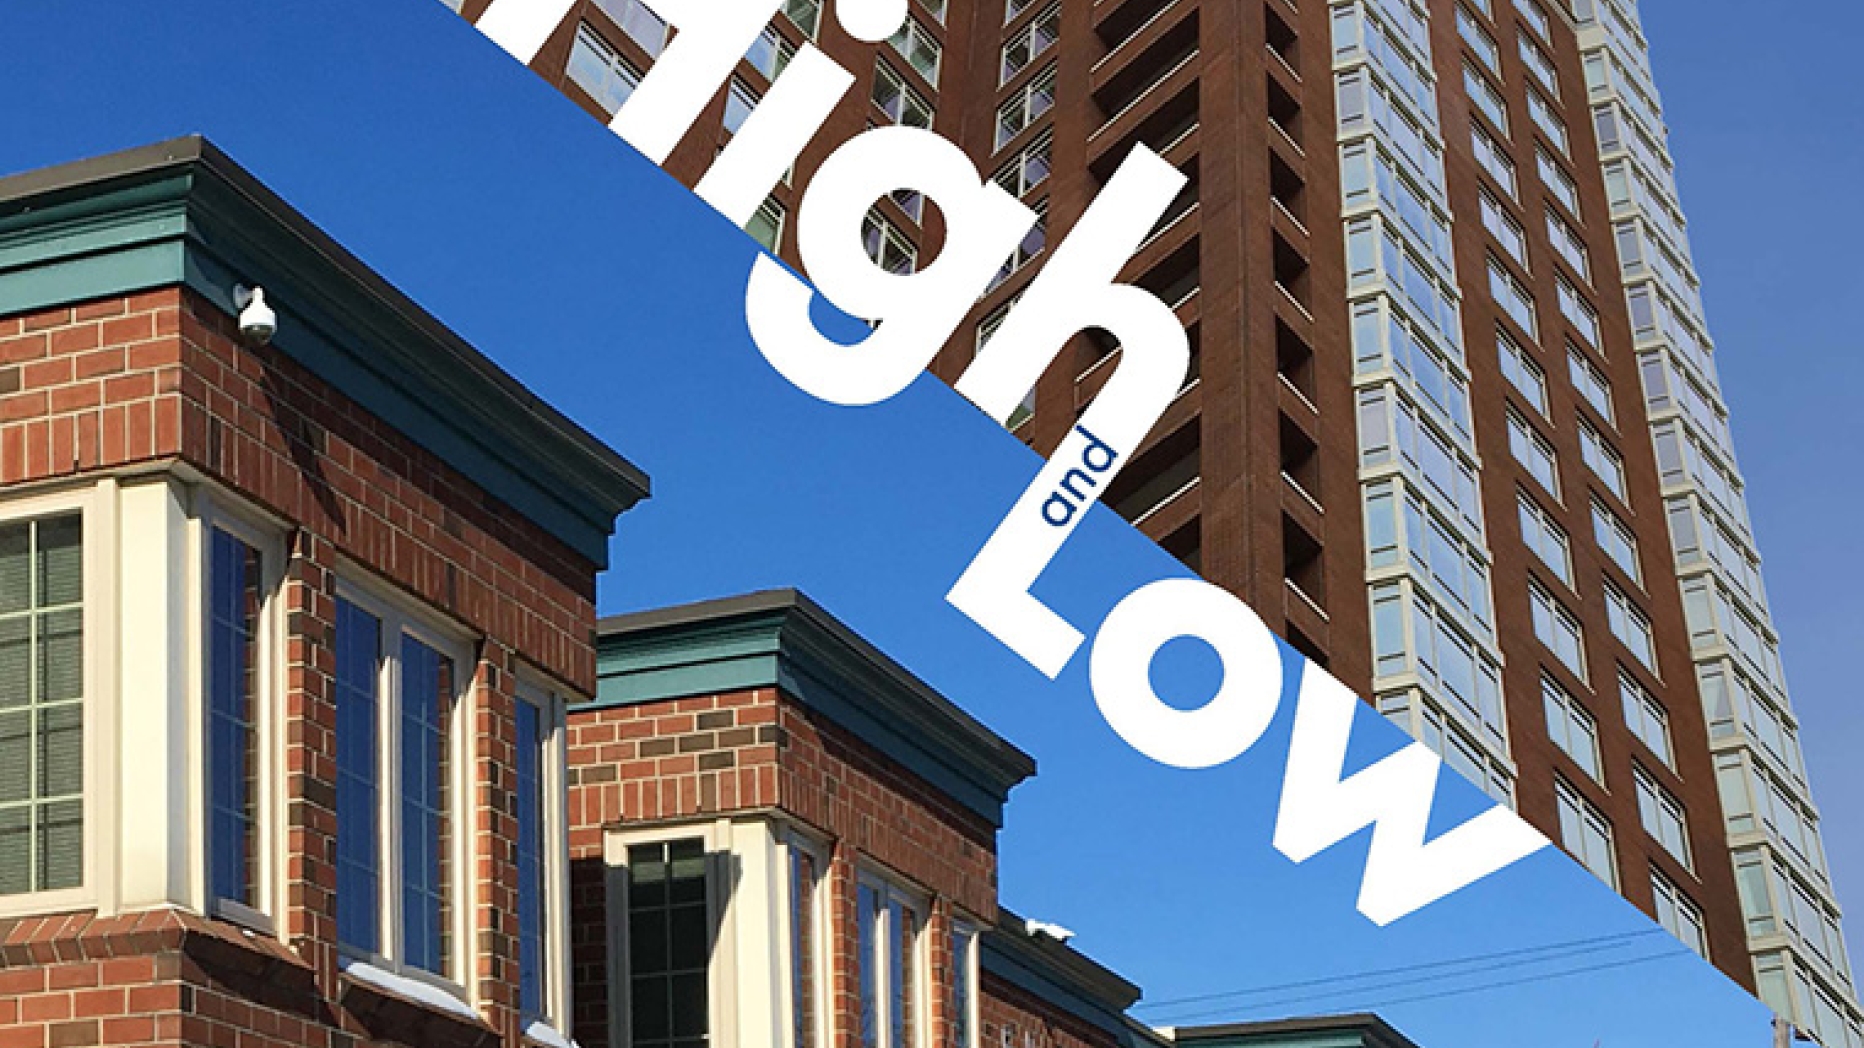 High and Low. Realigning Housing Incentives to Promote Equitable Development.